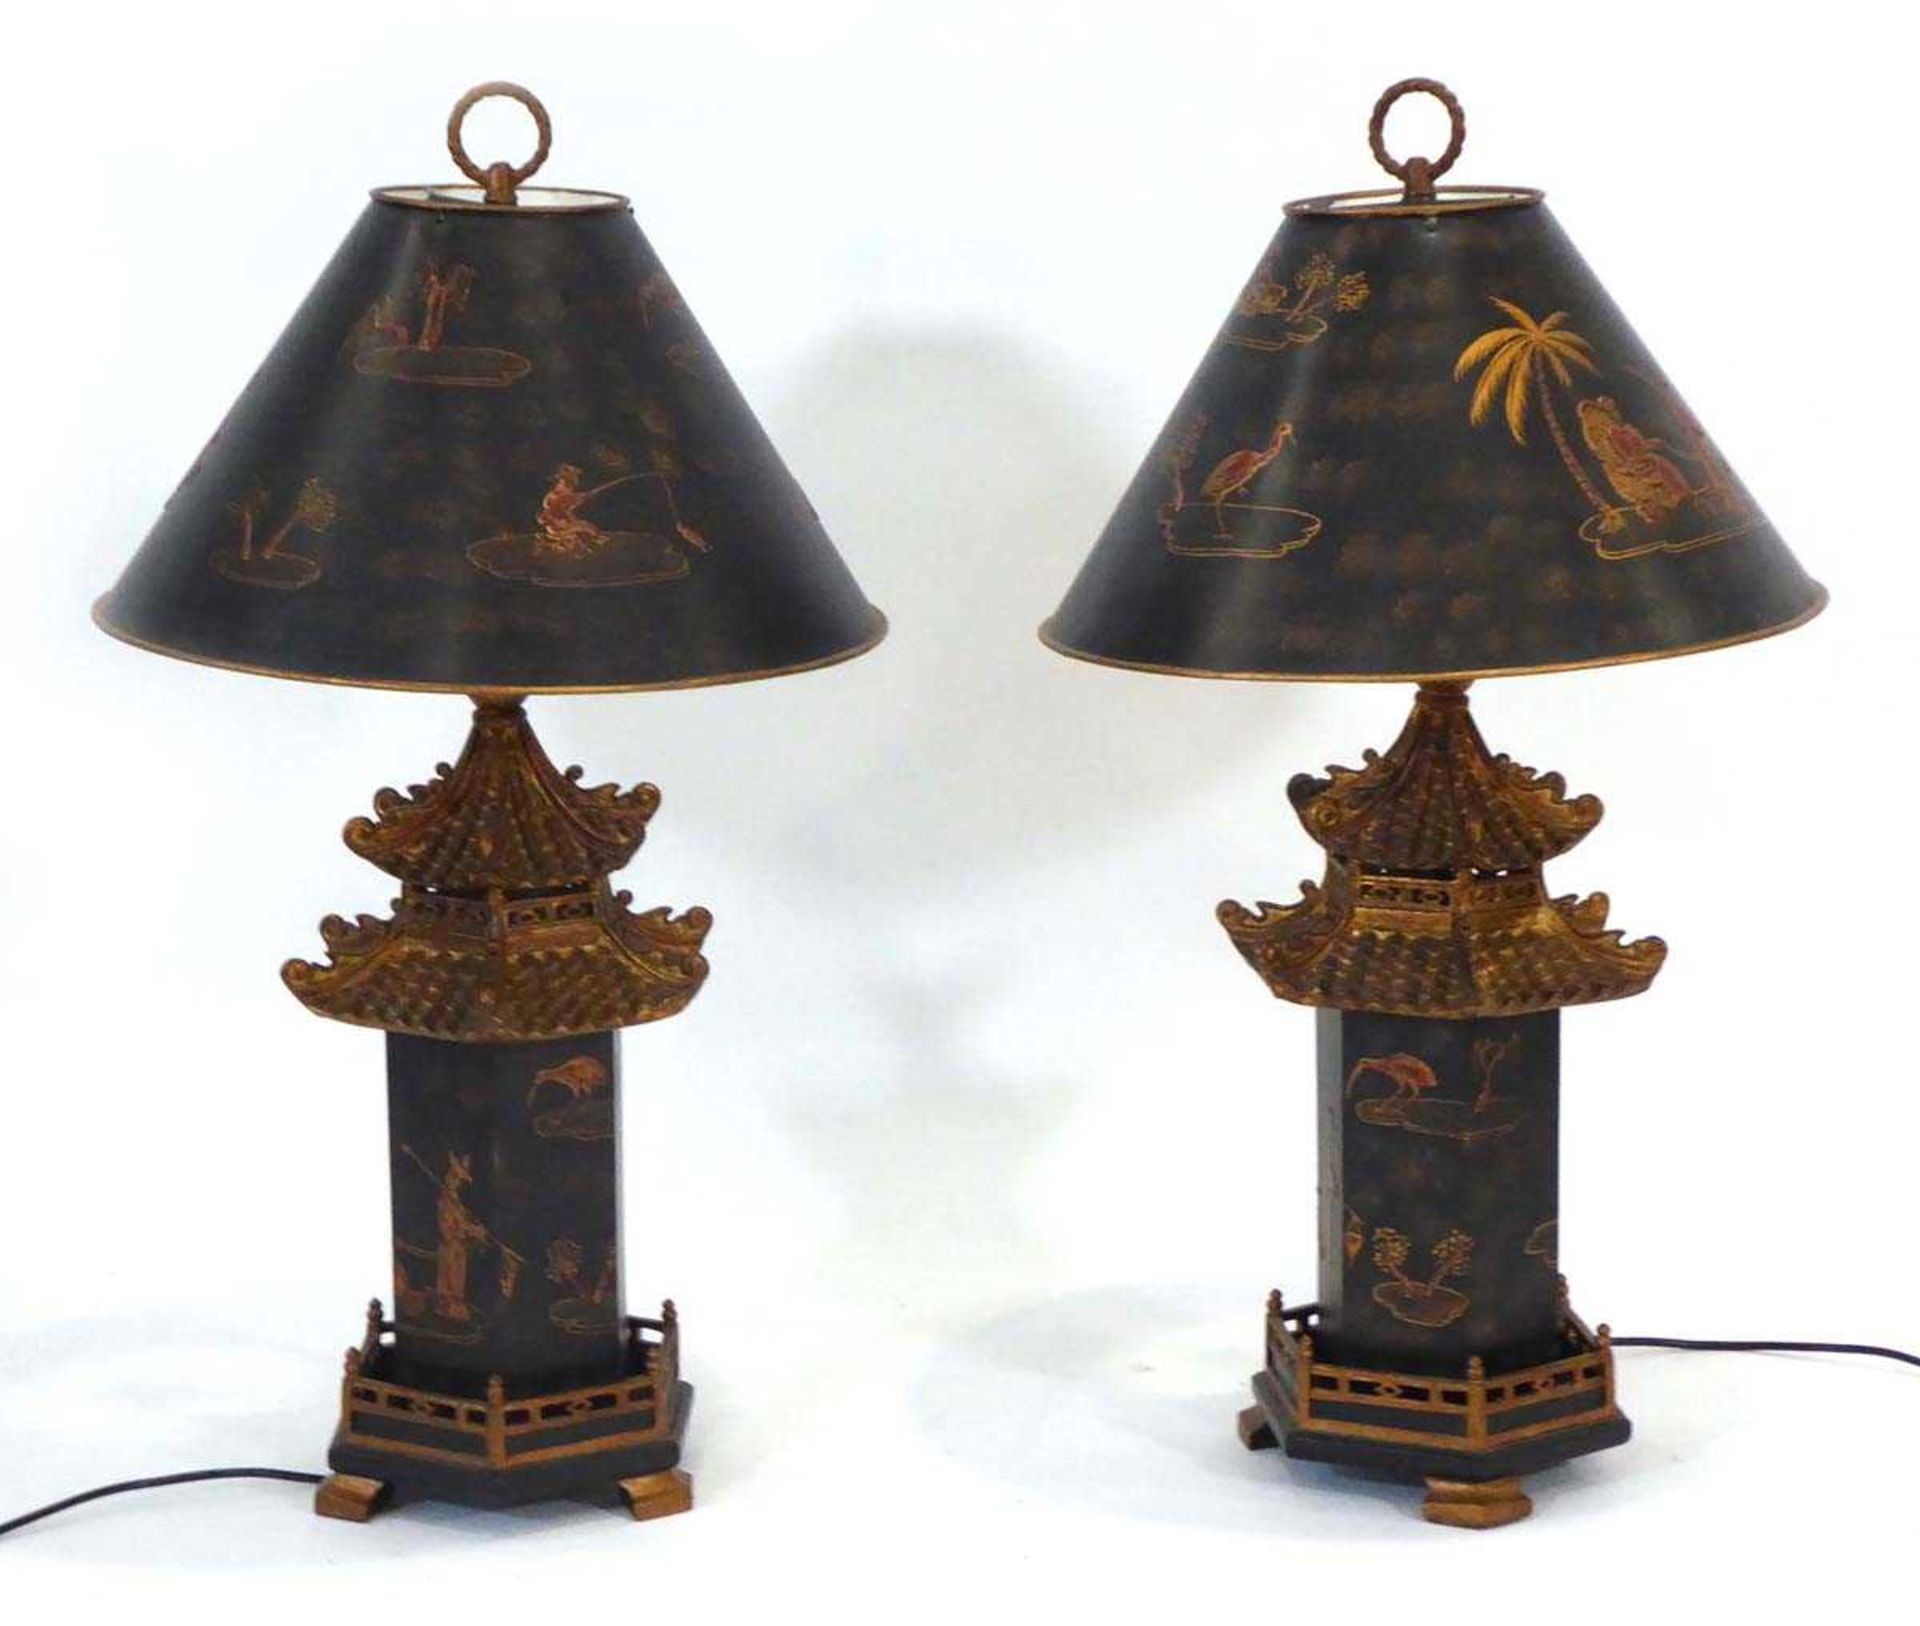 A pair of late 20th century chinoiserie table lamps, the black shades with gilded relief detail over